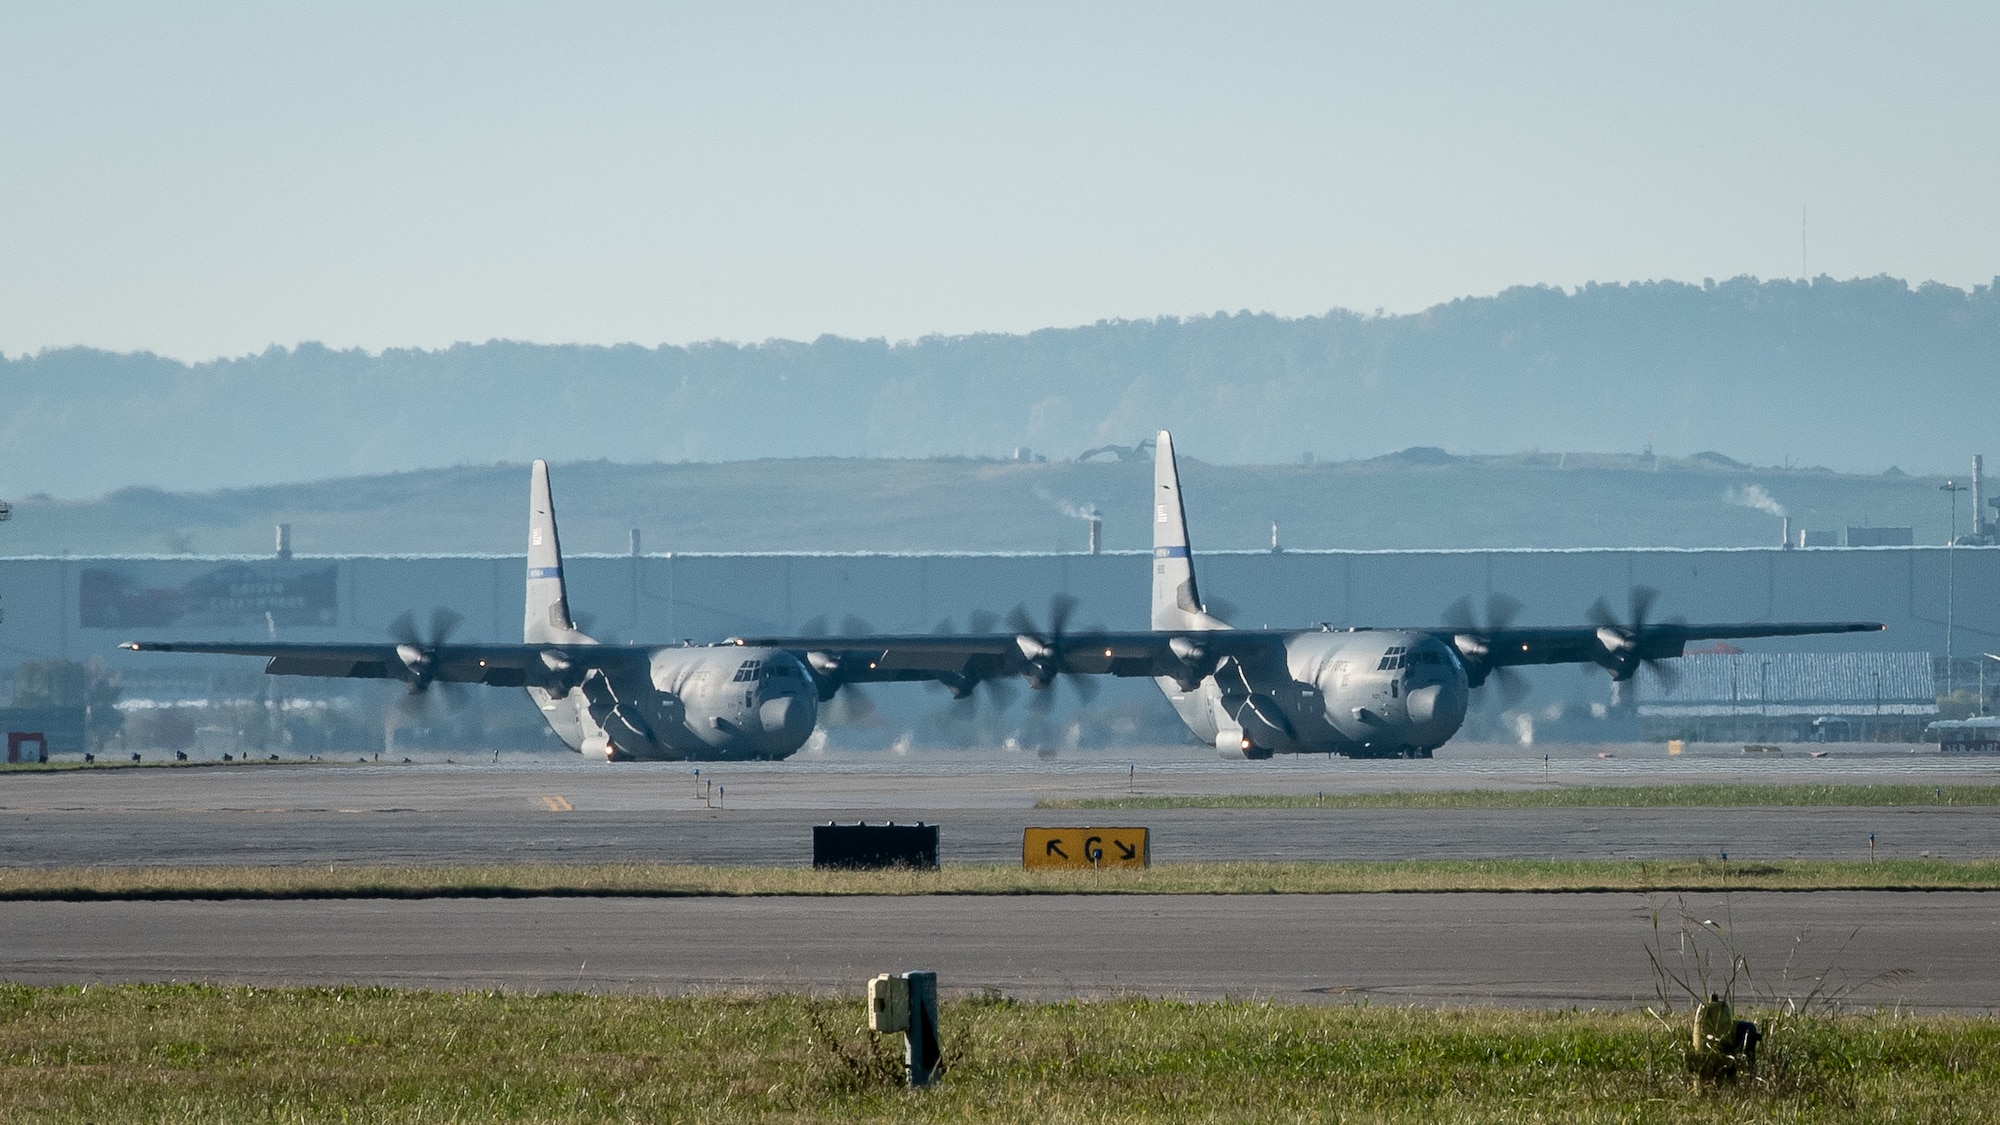 Two new C-130J Super Hercules aircraft arrive at the Kentucky Air National Guard Base in Louisville, Ky., Nov. 6, 2021, ushering in a new era of aviation for the 123rd Airlift Wing. The state-of-the-art transports are among eight the wing will receive over the next 11 months to replace eight aging C-130 H-model aircraft, which entered service in 1992 and have seen duty all over the world. (U.S. Air National Guard photo by Dale Greer)